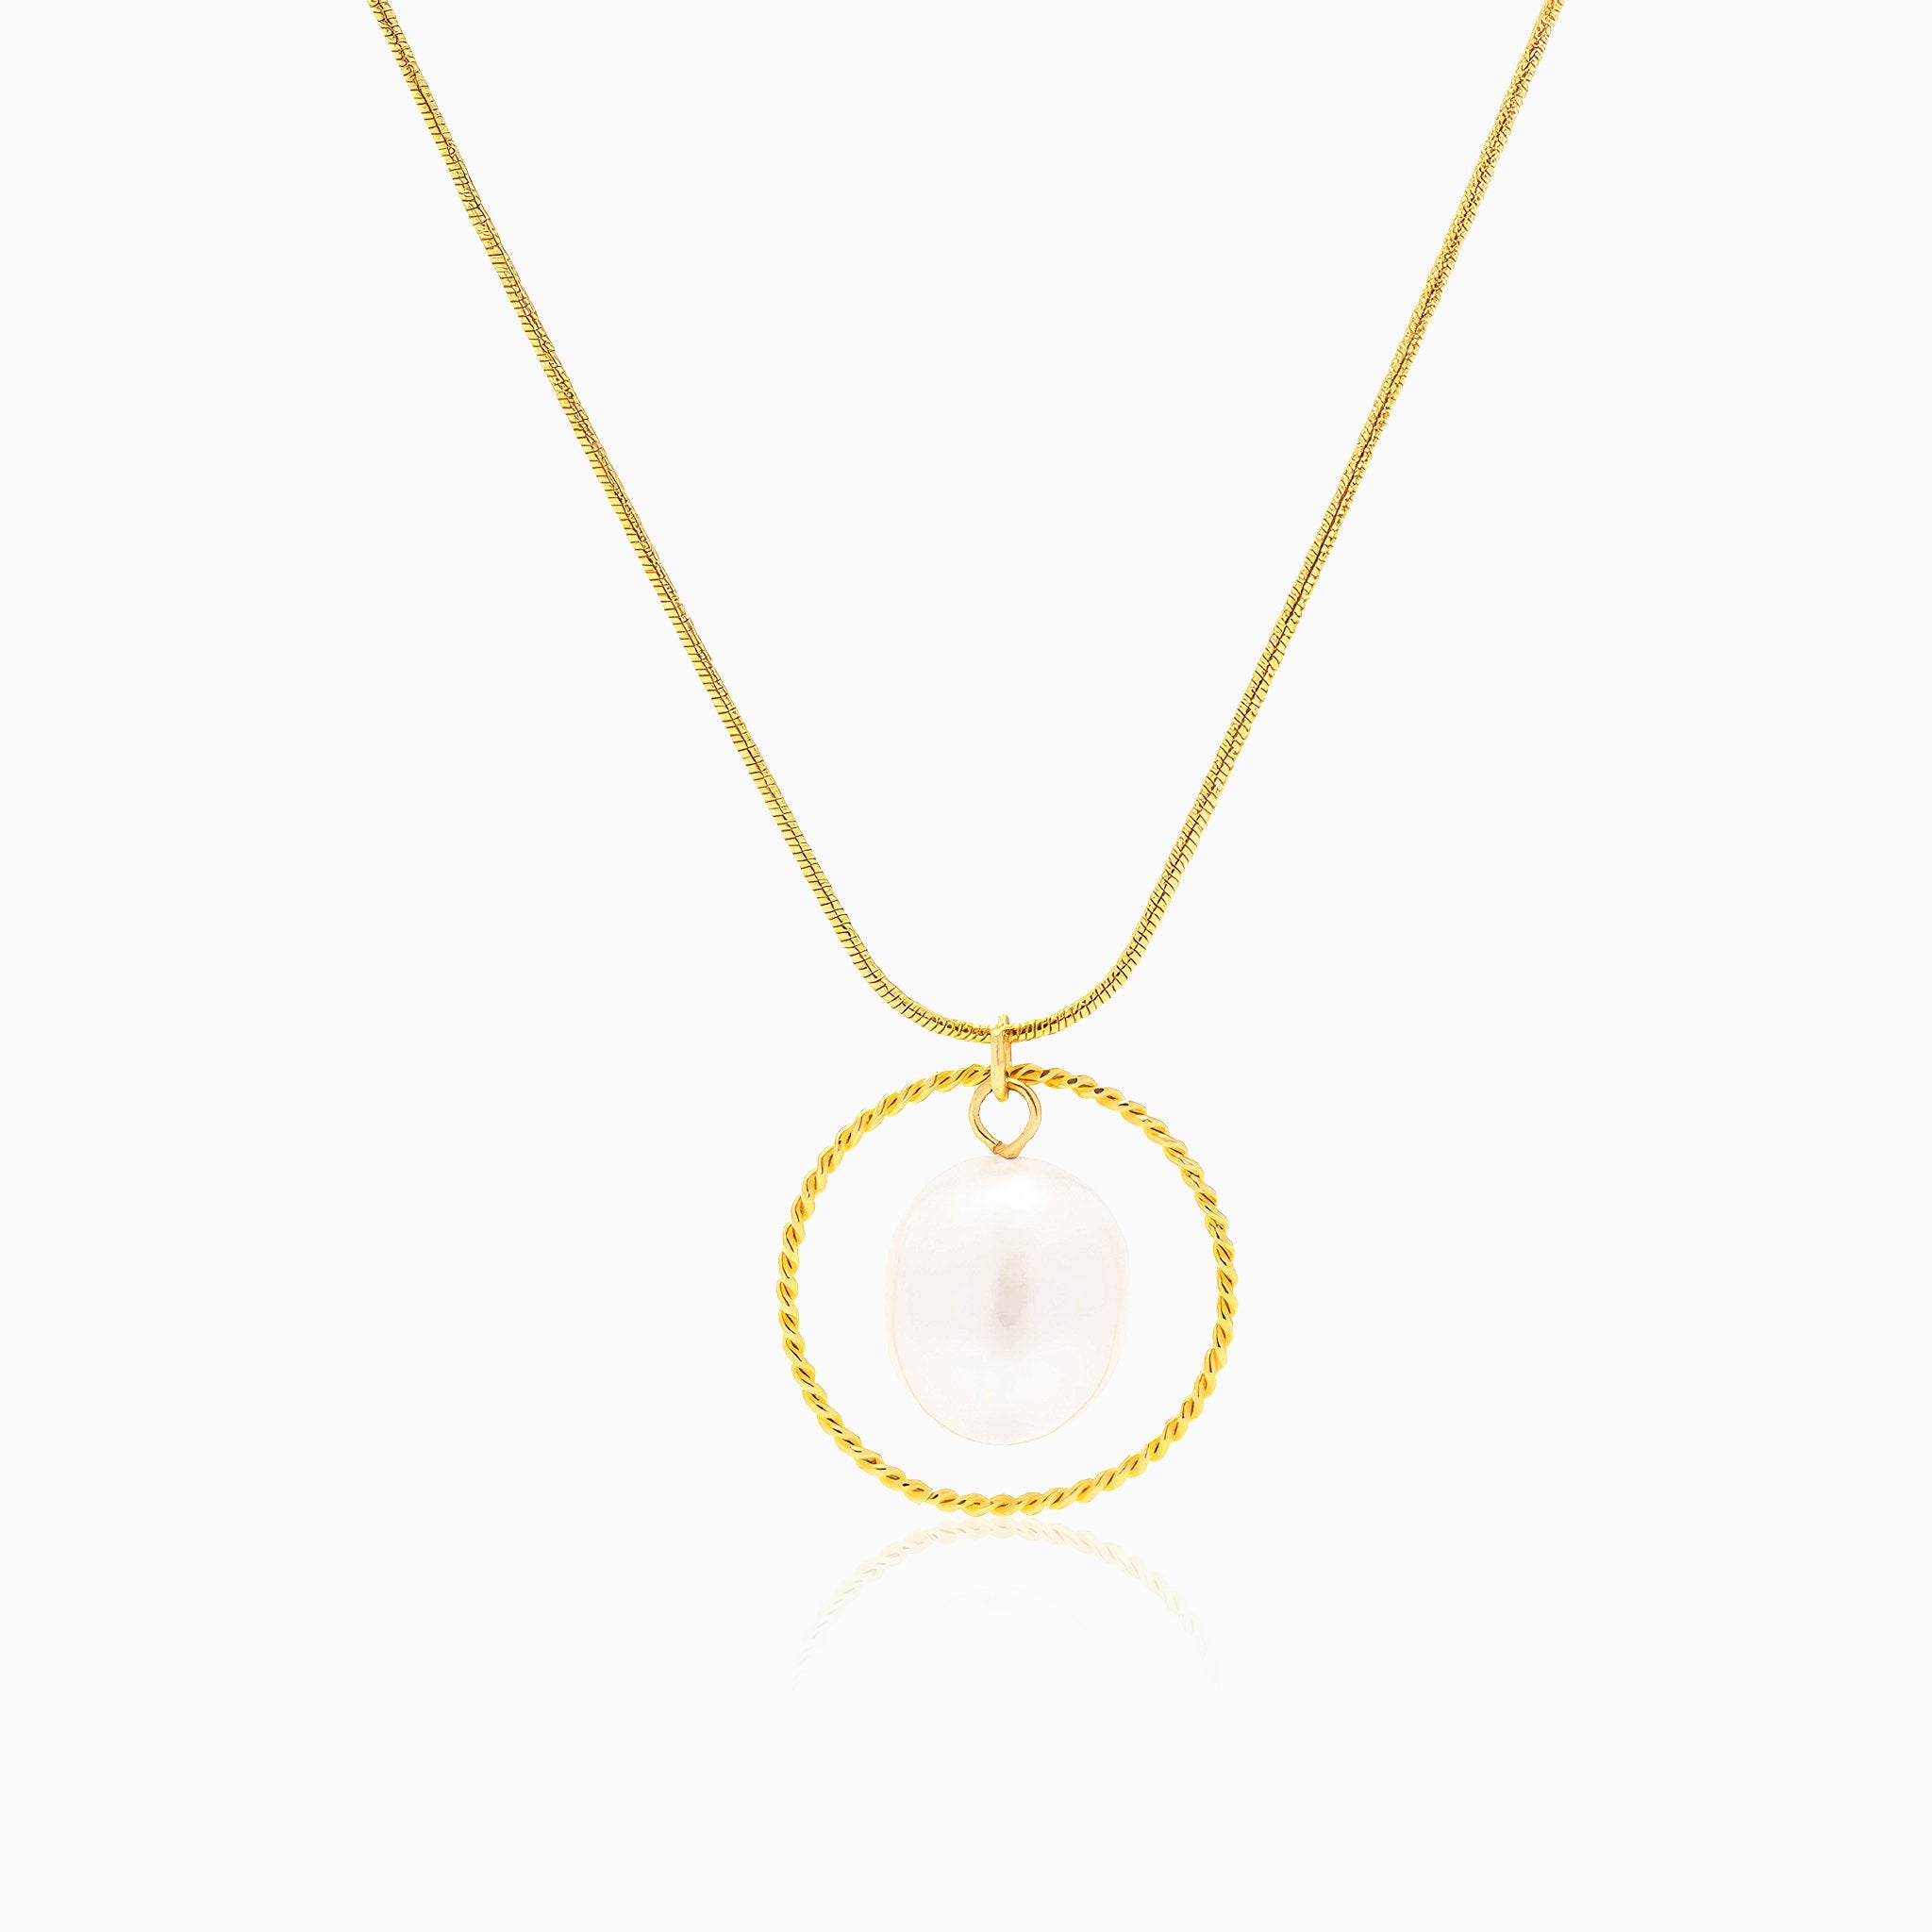 Necklace with Freshwater Pearl Pendant - Nobbier - Necklace - 18K Gold And Titanium PVD Coated Jewelry